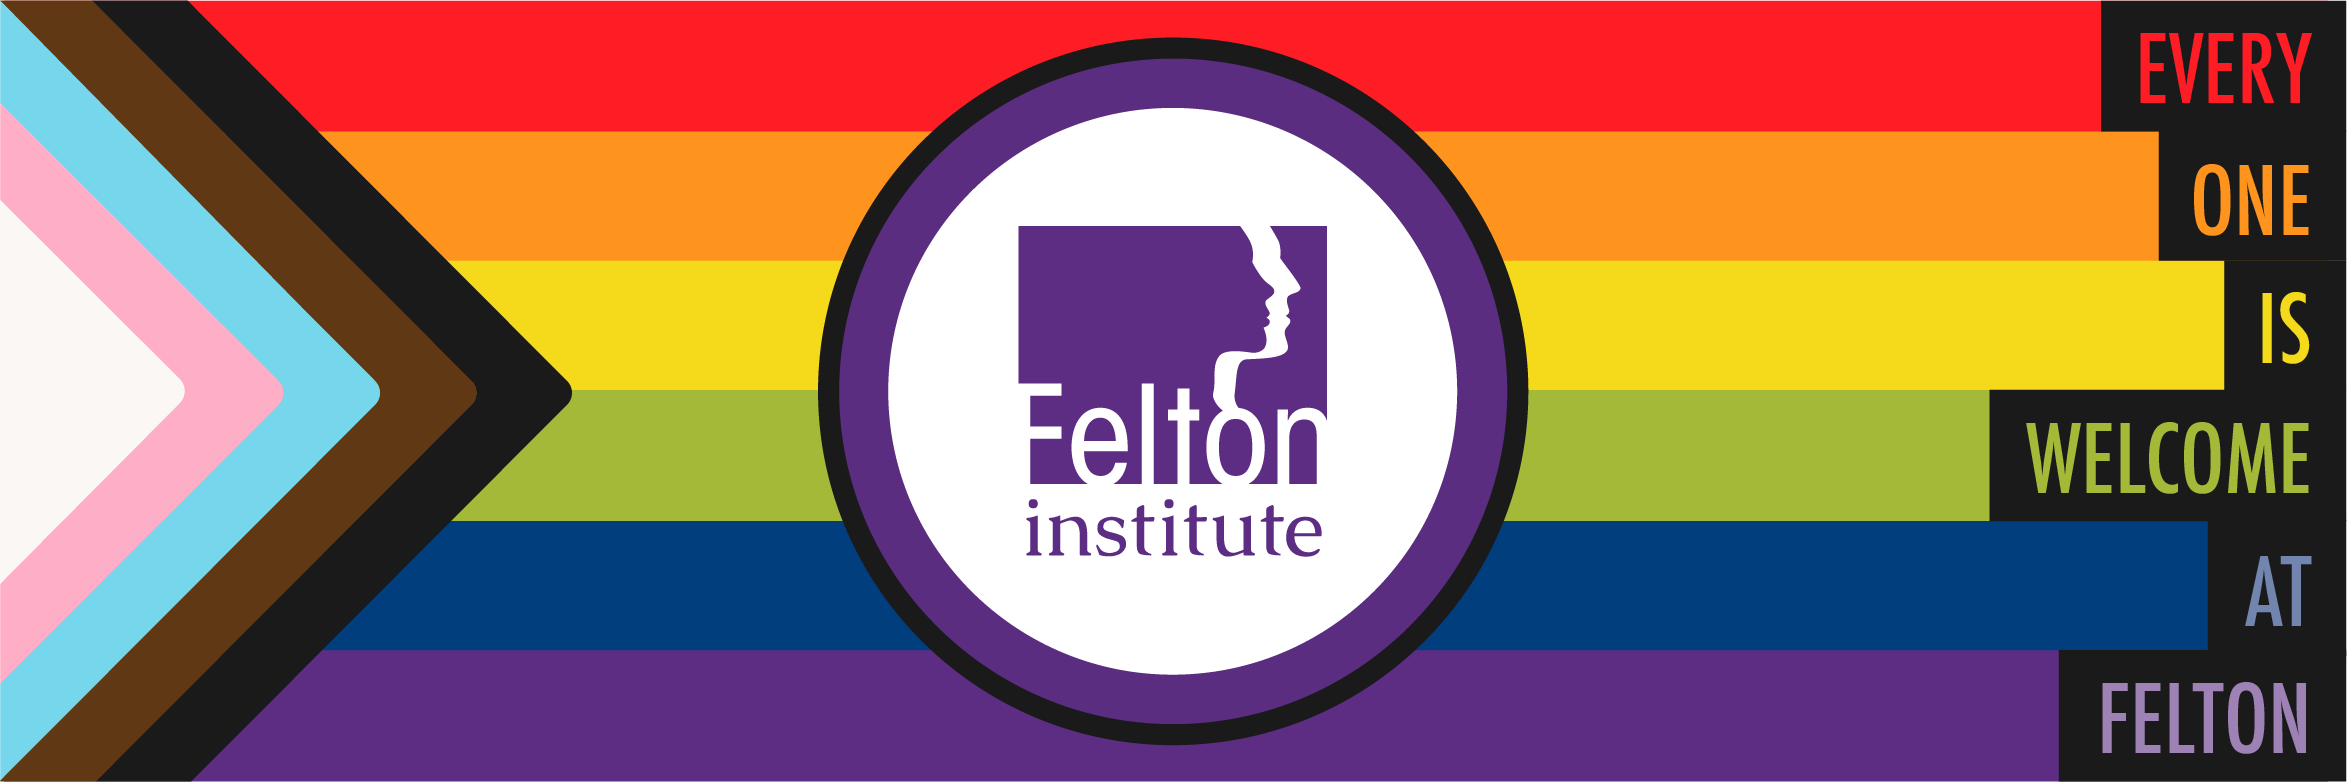 Everyone is Welcome at Felton Institute - LGBTQIA+ Pride Flag